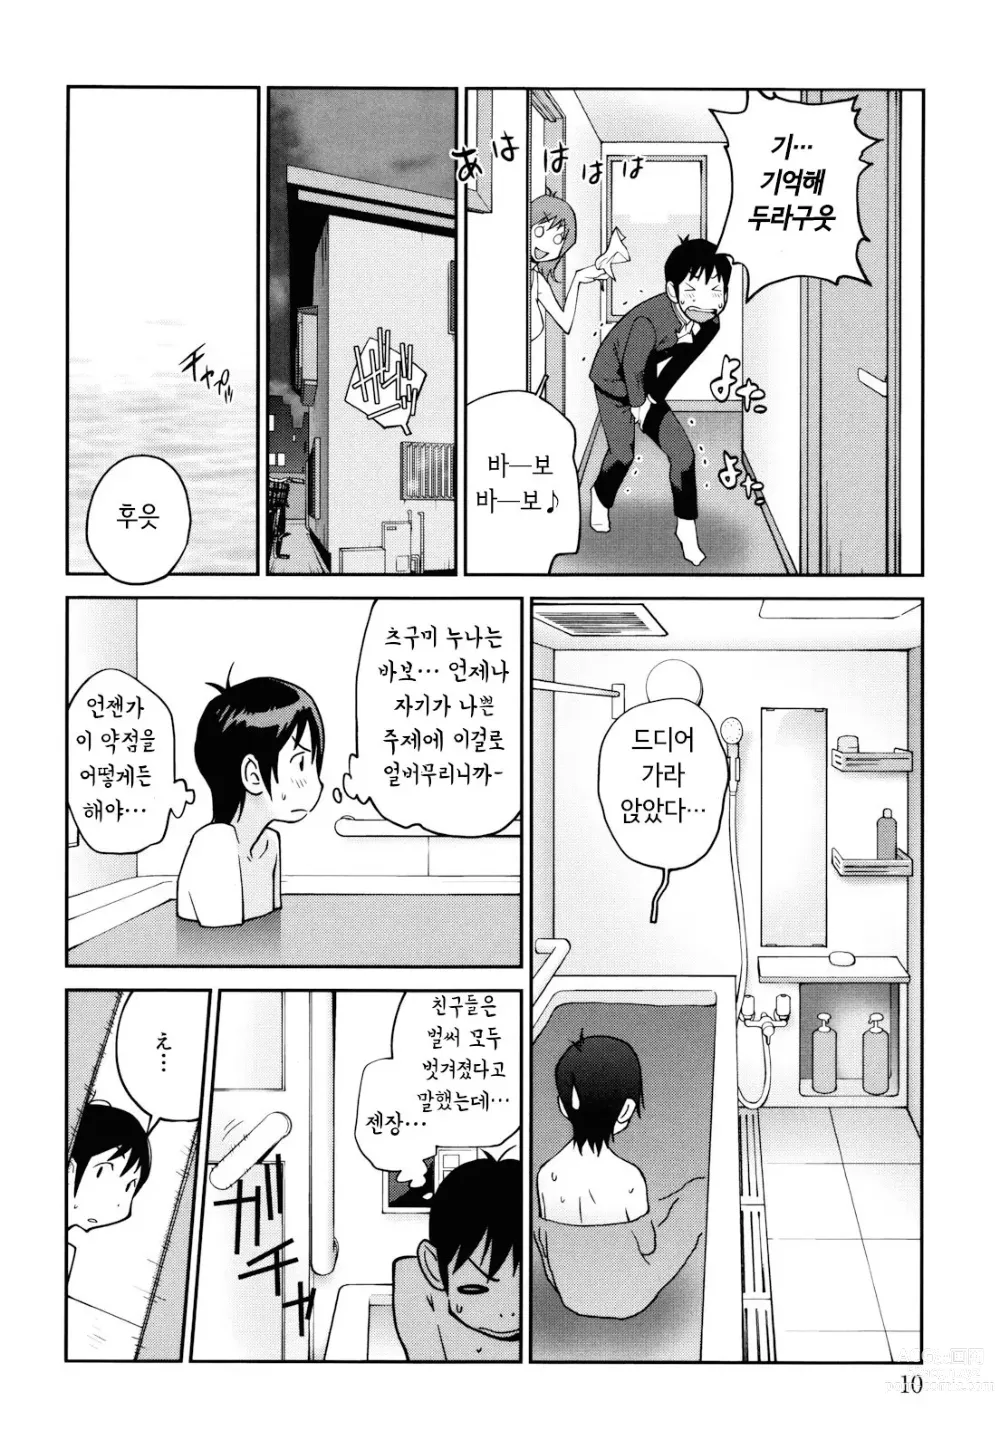 Page 10 of manga NAKED PARTY